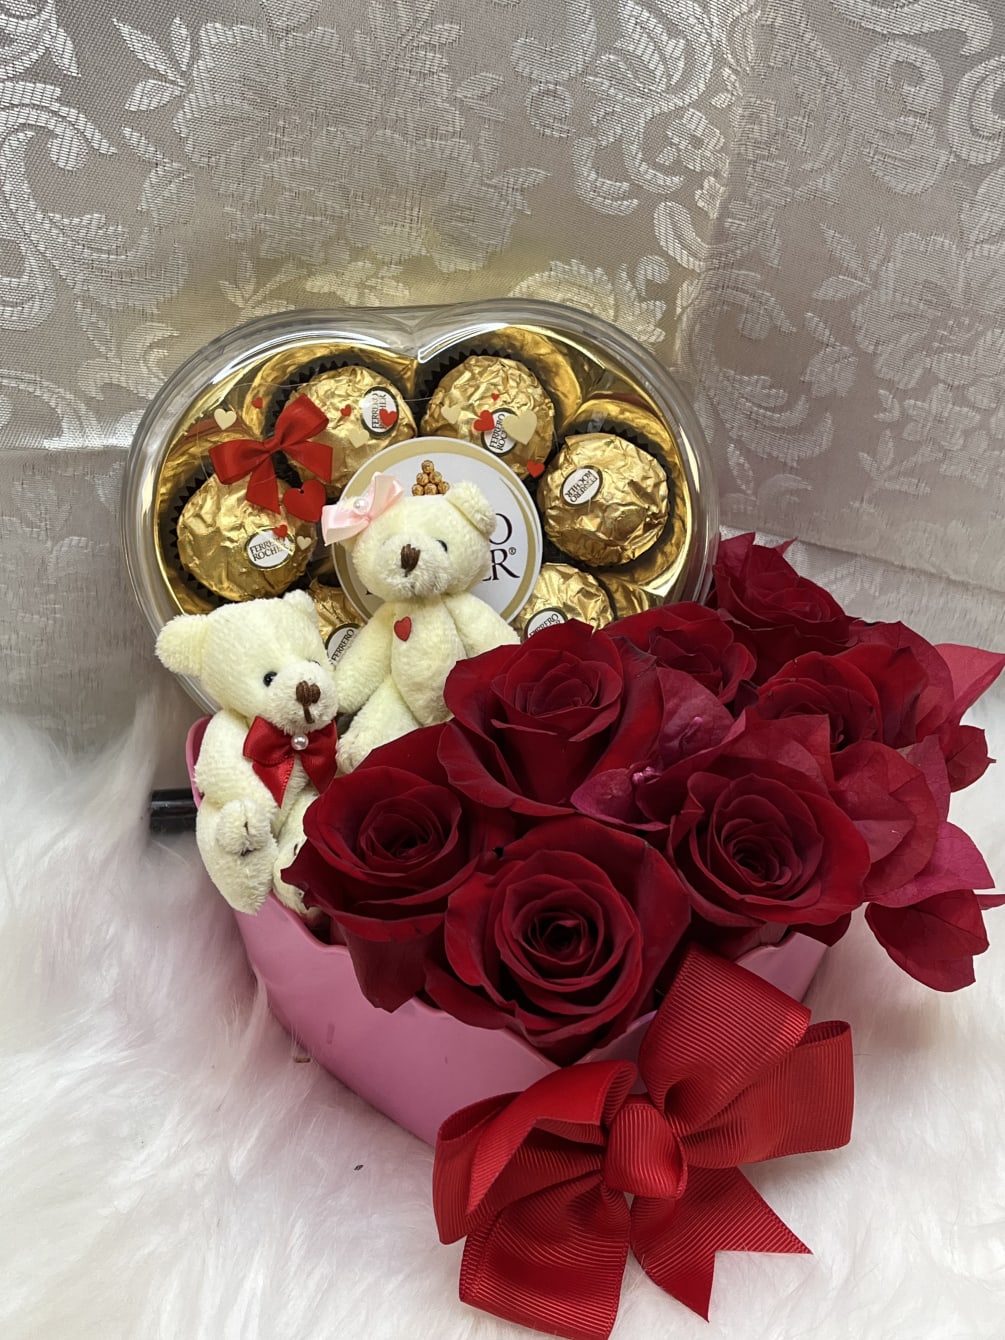 Arrangement especially for lovers based on heart with red roses (you can